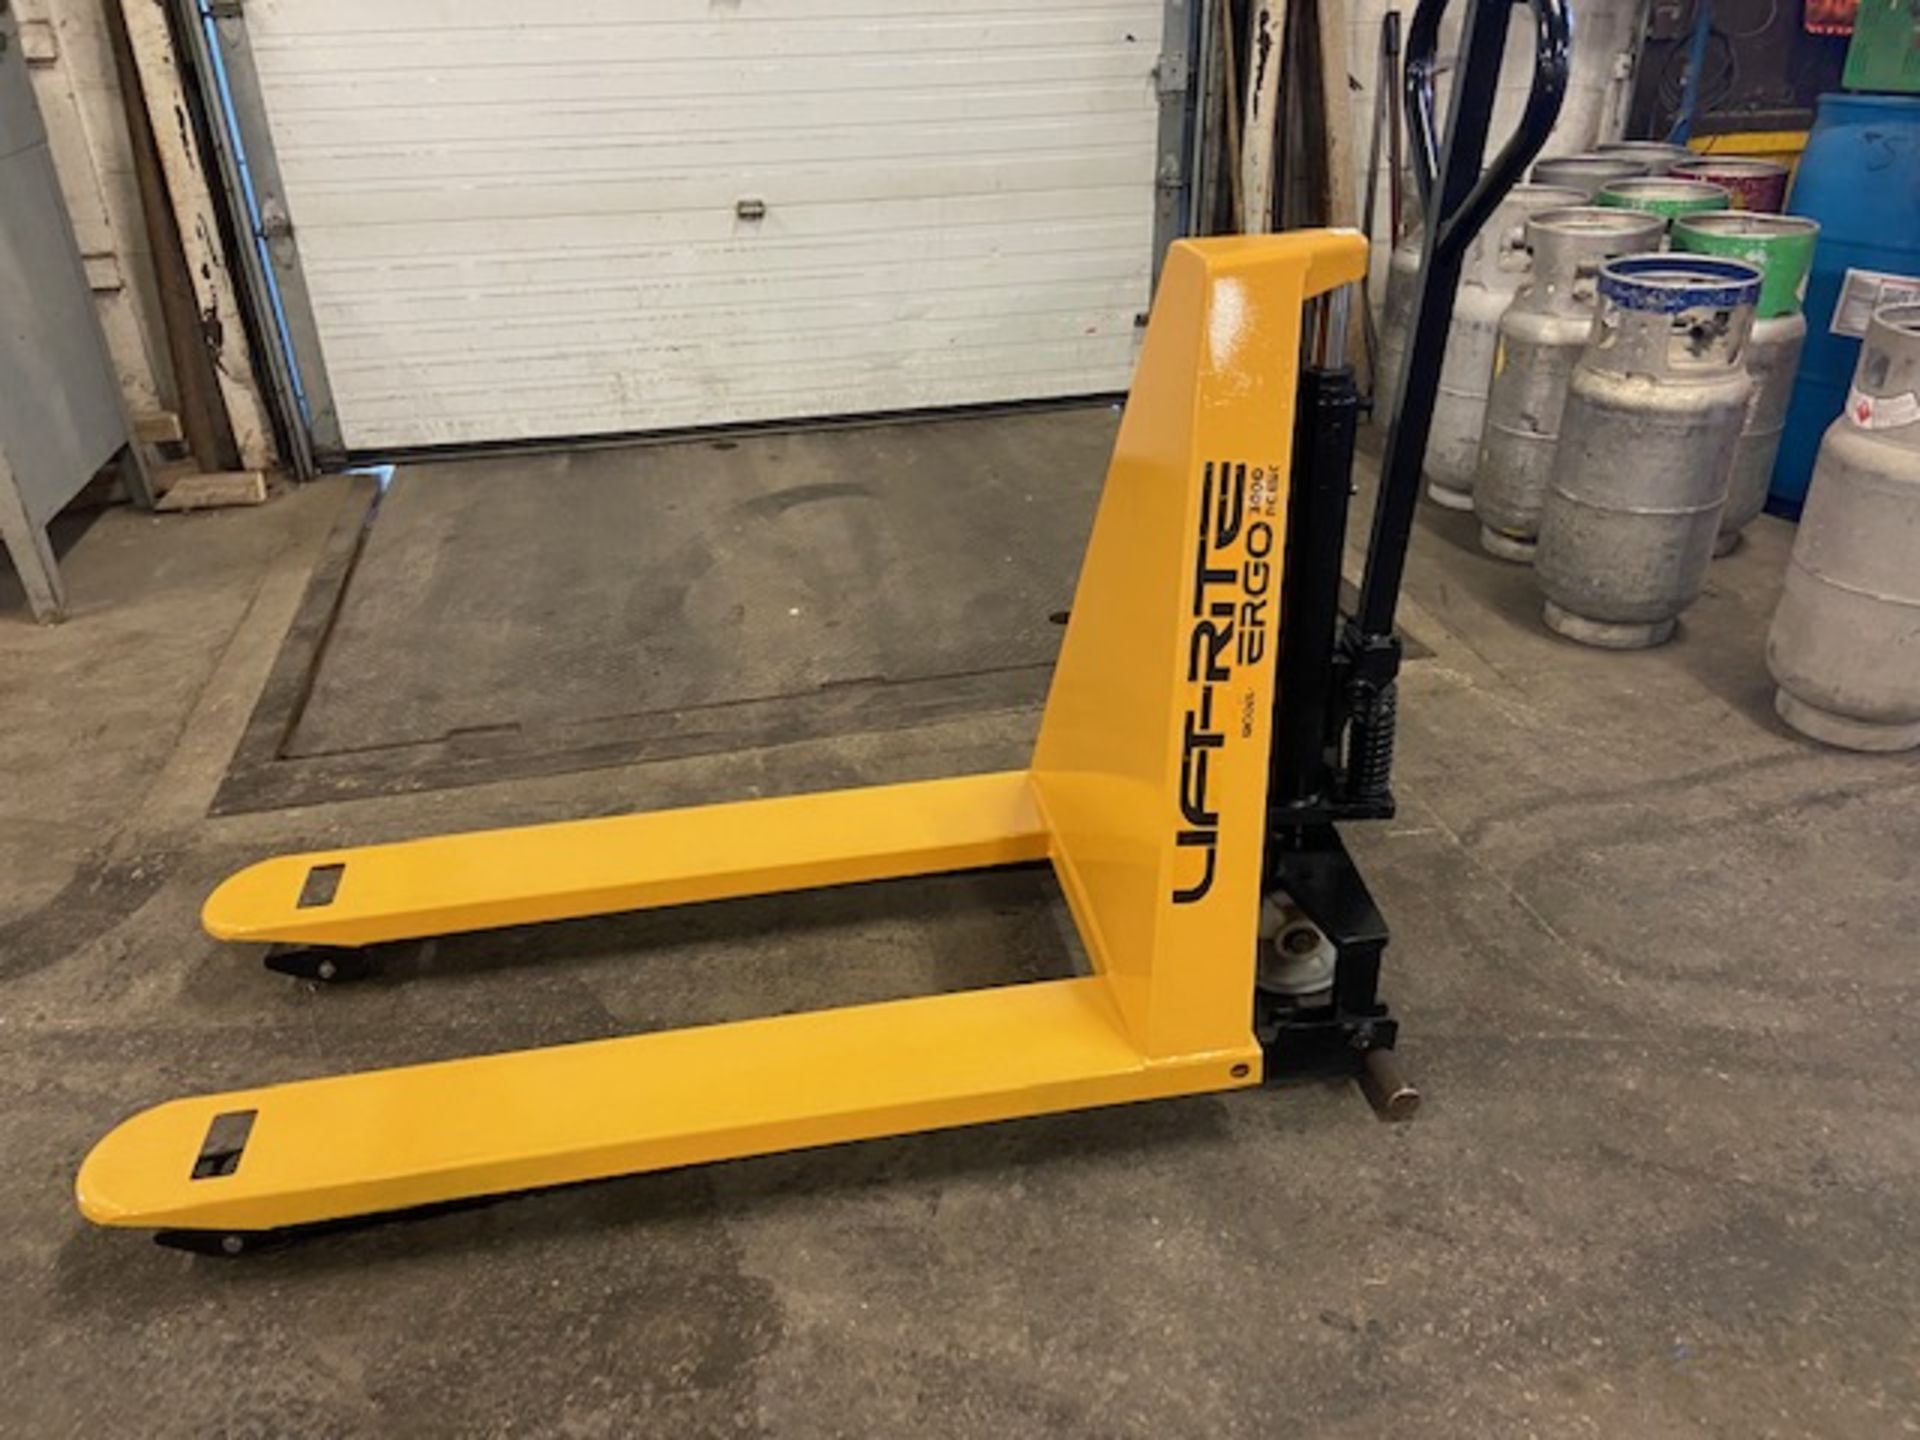 Lift-Rite Hydraulic Pump Cart with 30" Lift height MINT